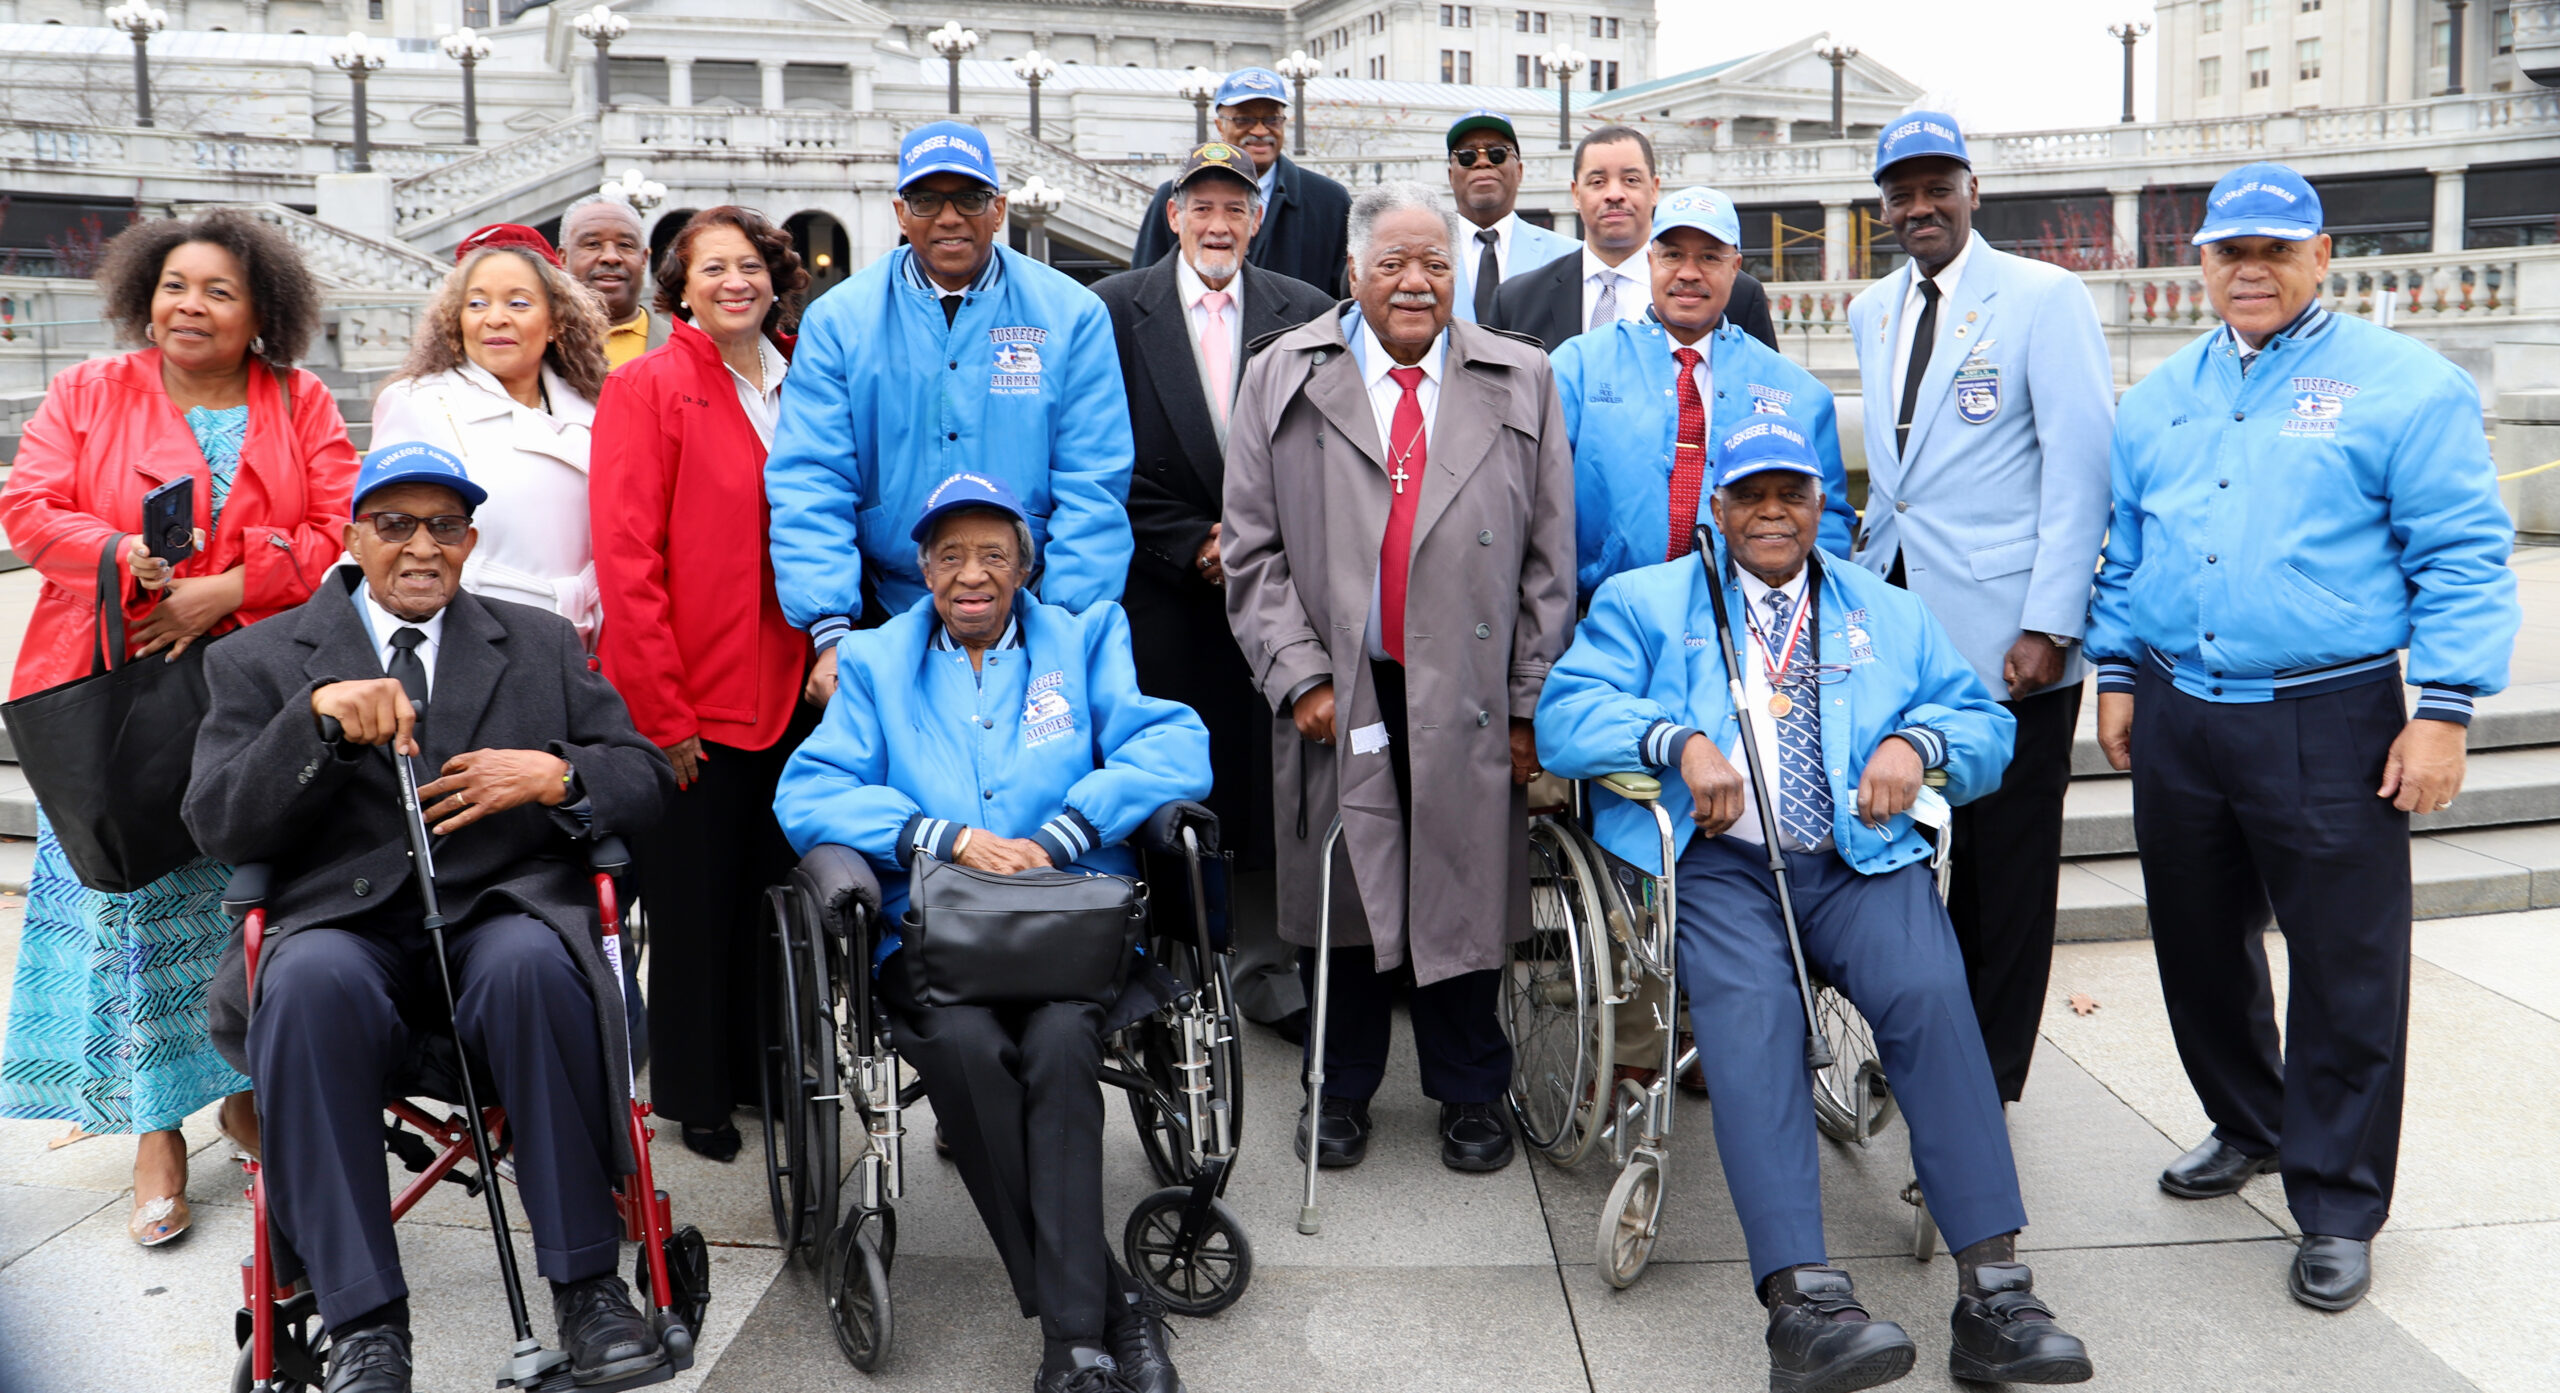 Tuskegee Airmen Commemoration Day Signing Ceremony, November 2022